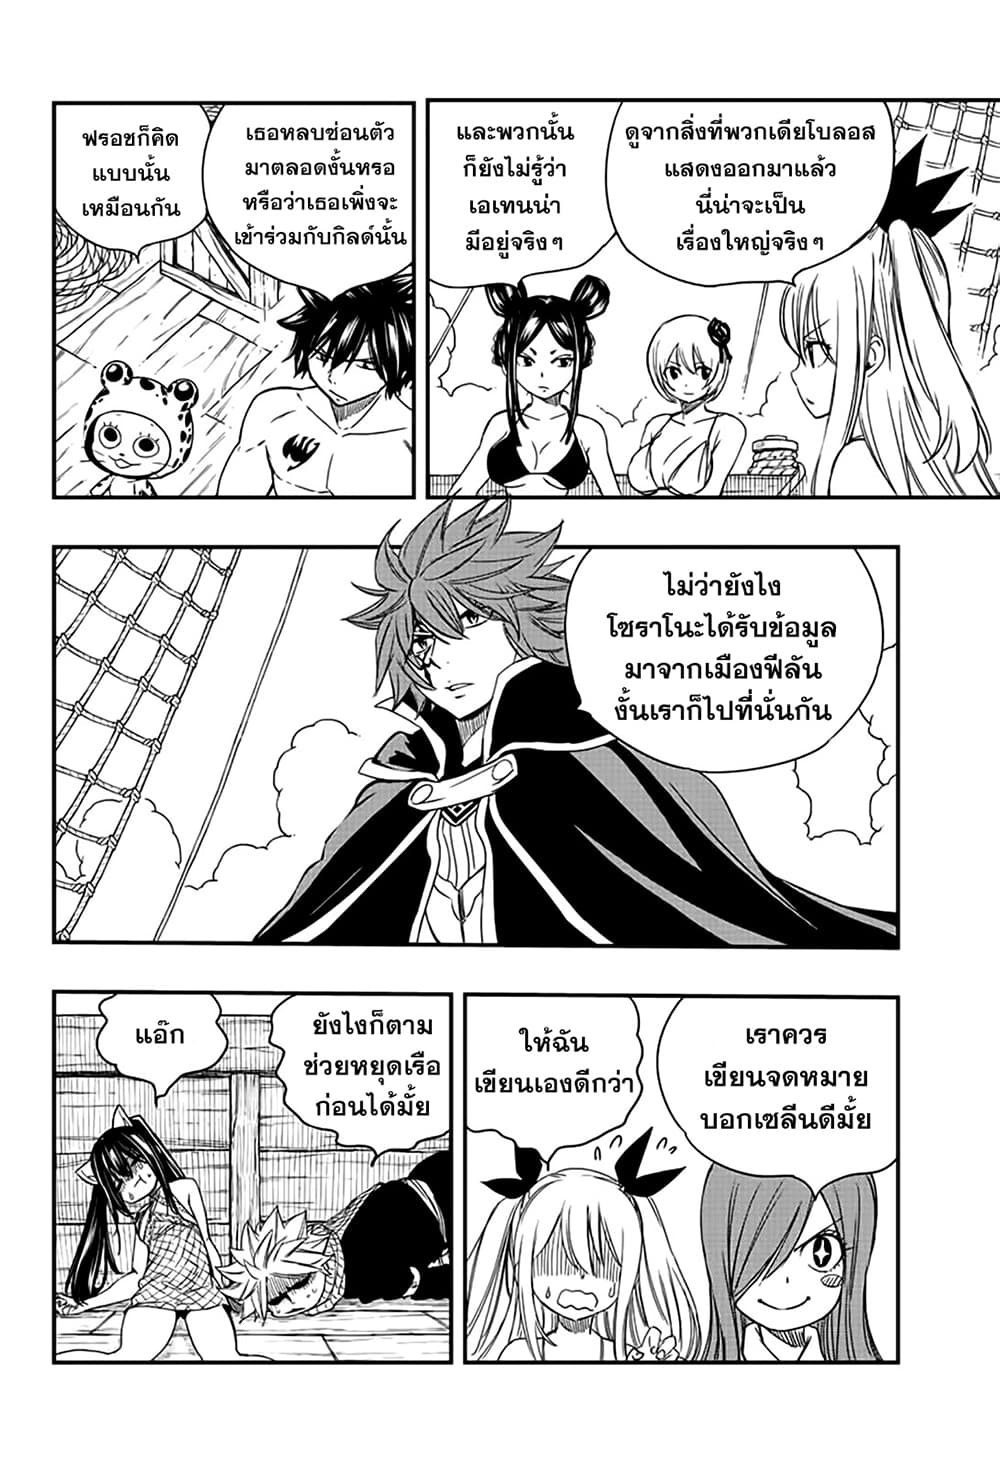 Fairy Tail 100 Years Quest à¸à¸­à¸à¸à¸µà¹ 126 (6)